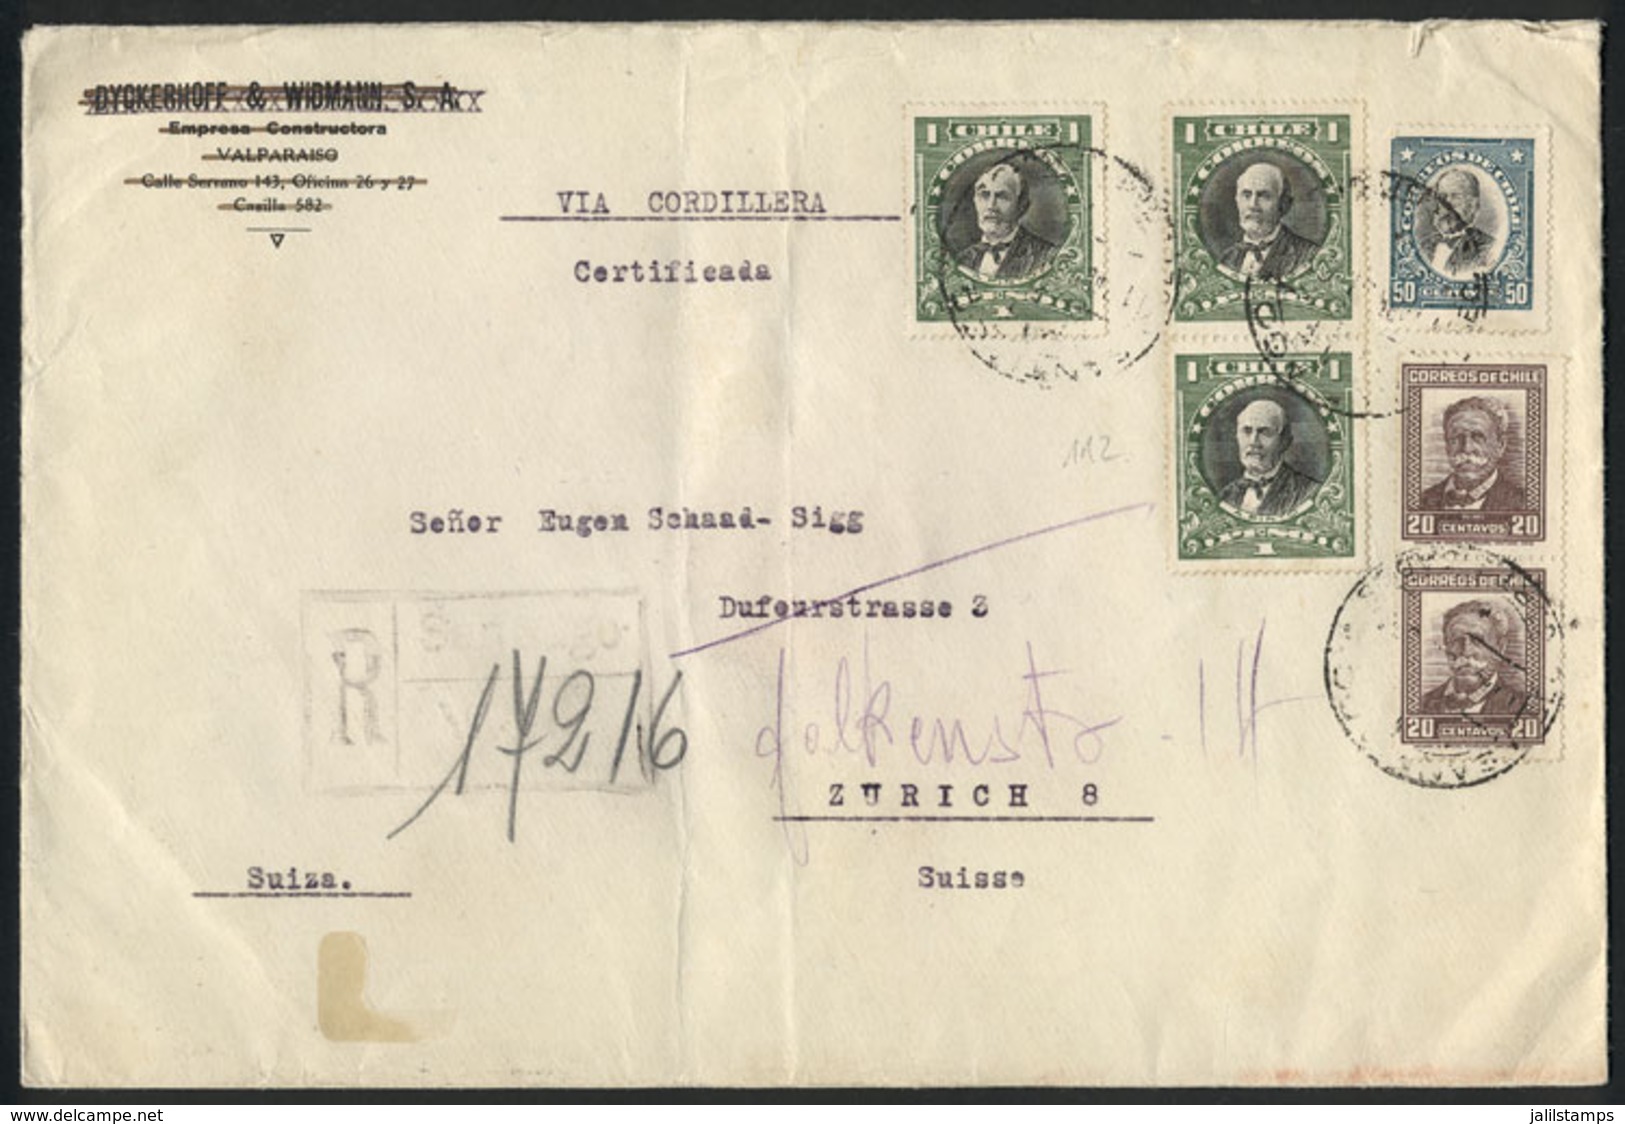 482 CHILE: 4 Covers Sent To Switzerland Between 1929 And 1948, Nice High Postages, Very Fine Quality, Market Value US$50 - Chili